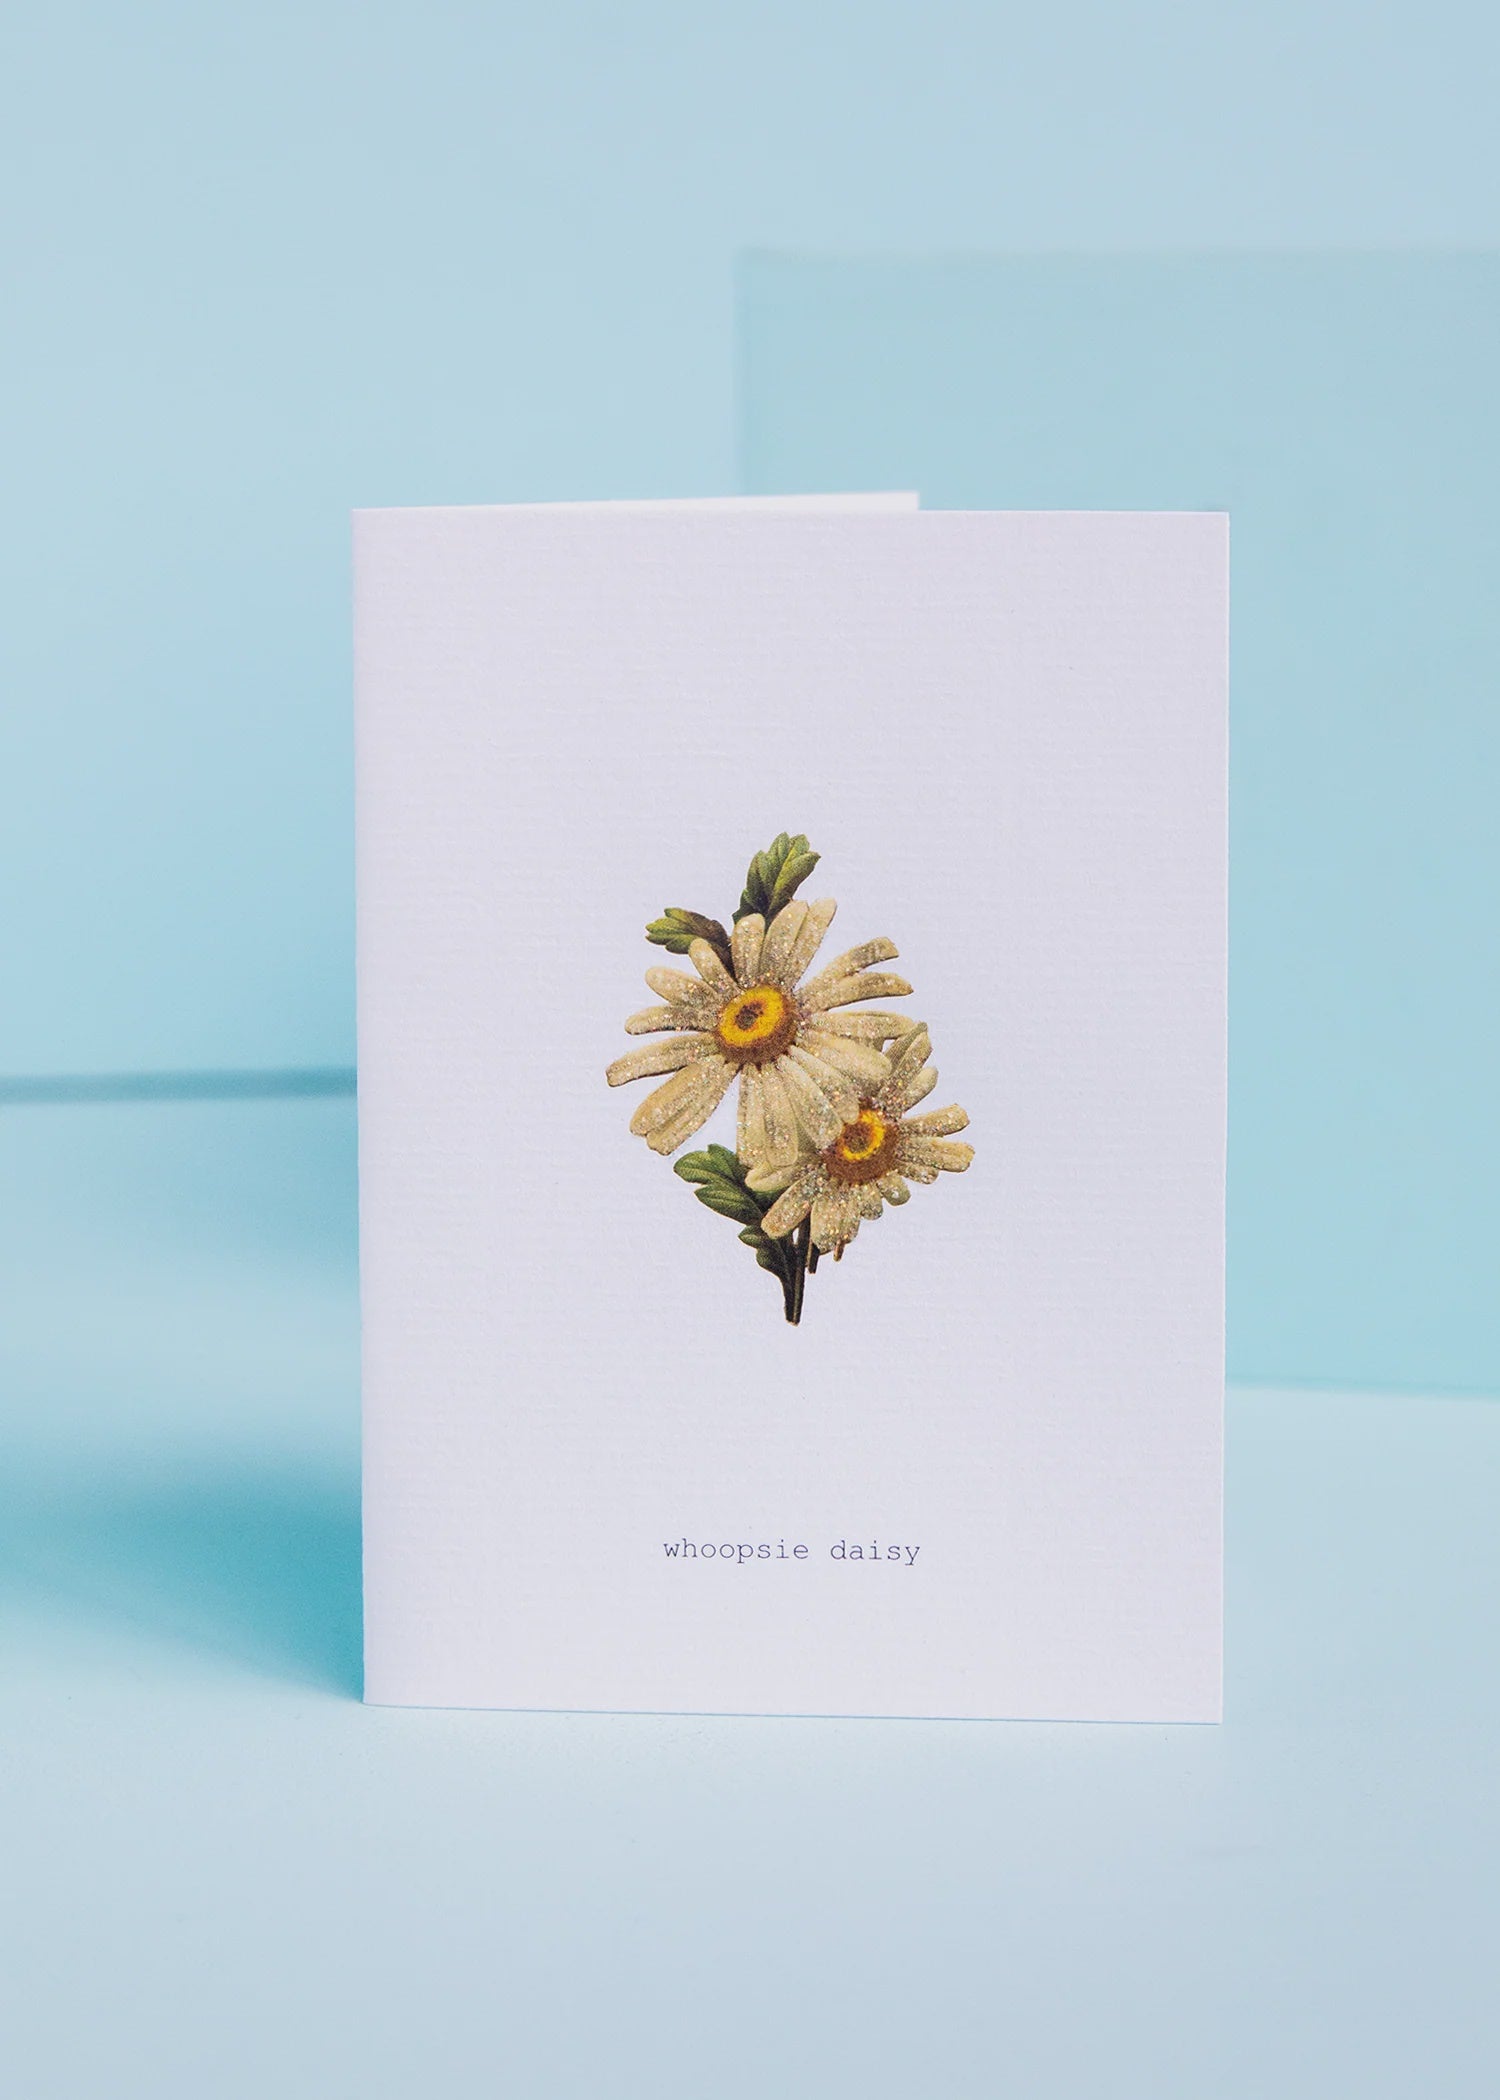 Whoopsie Daisy Greeting Card